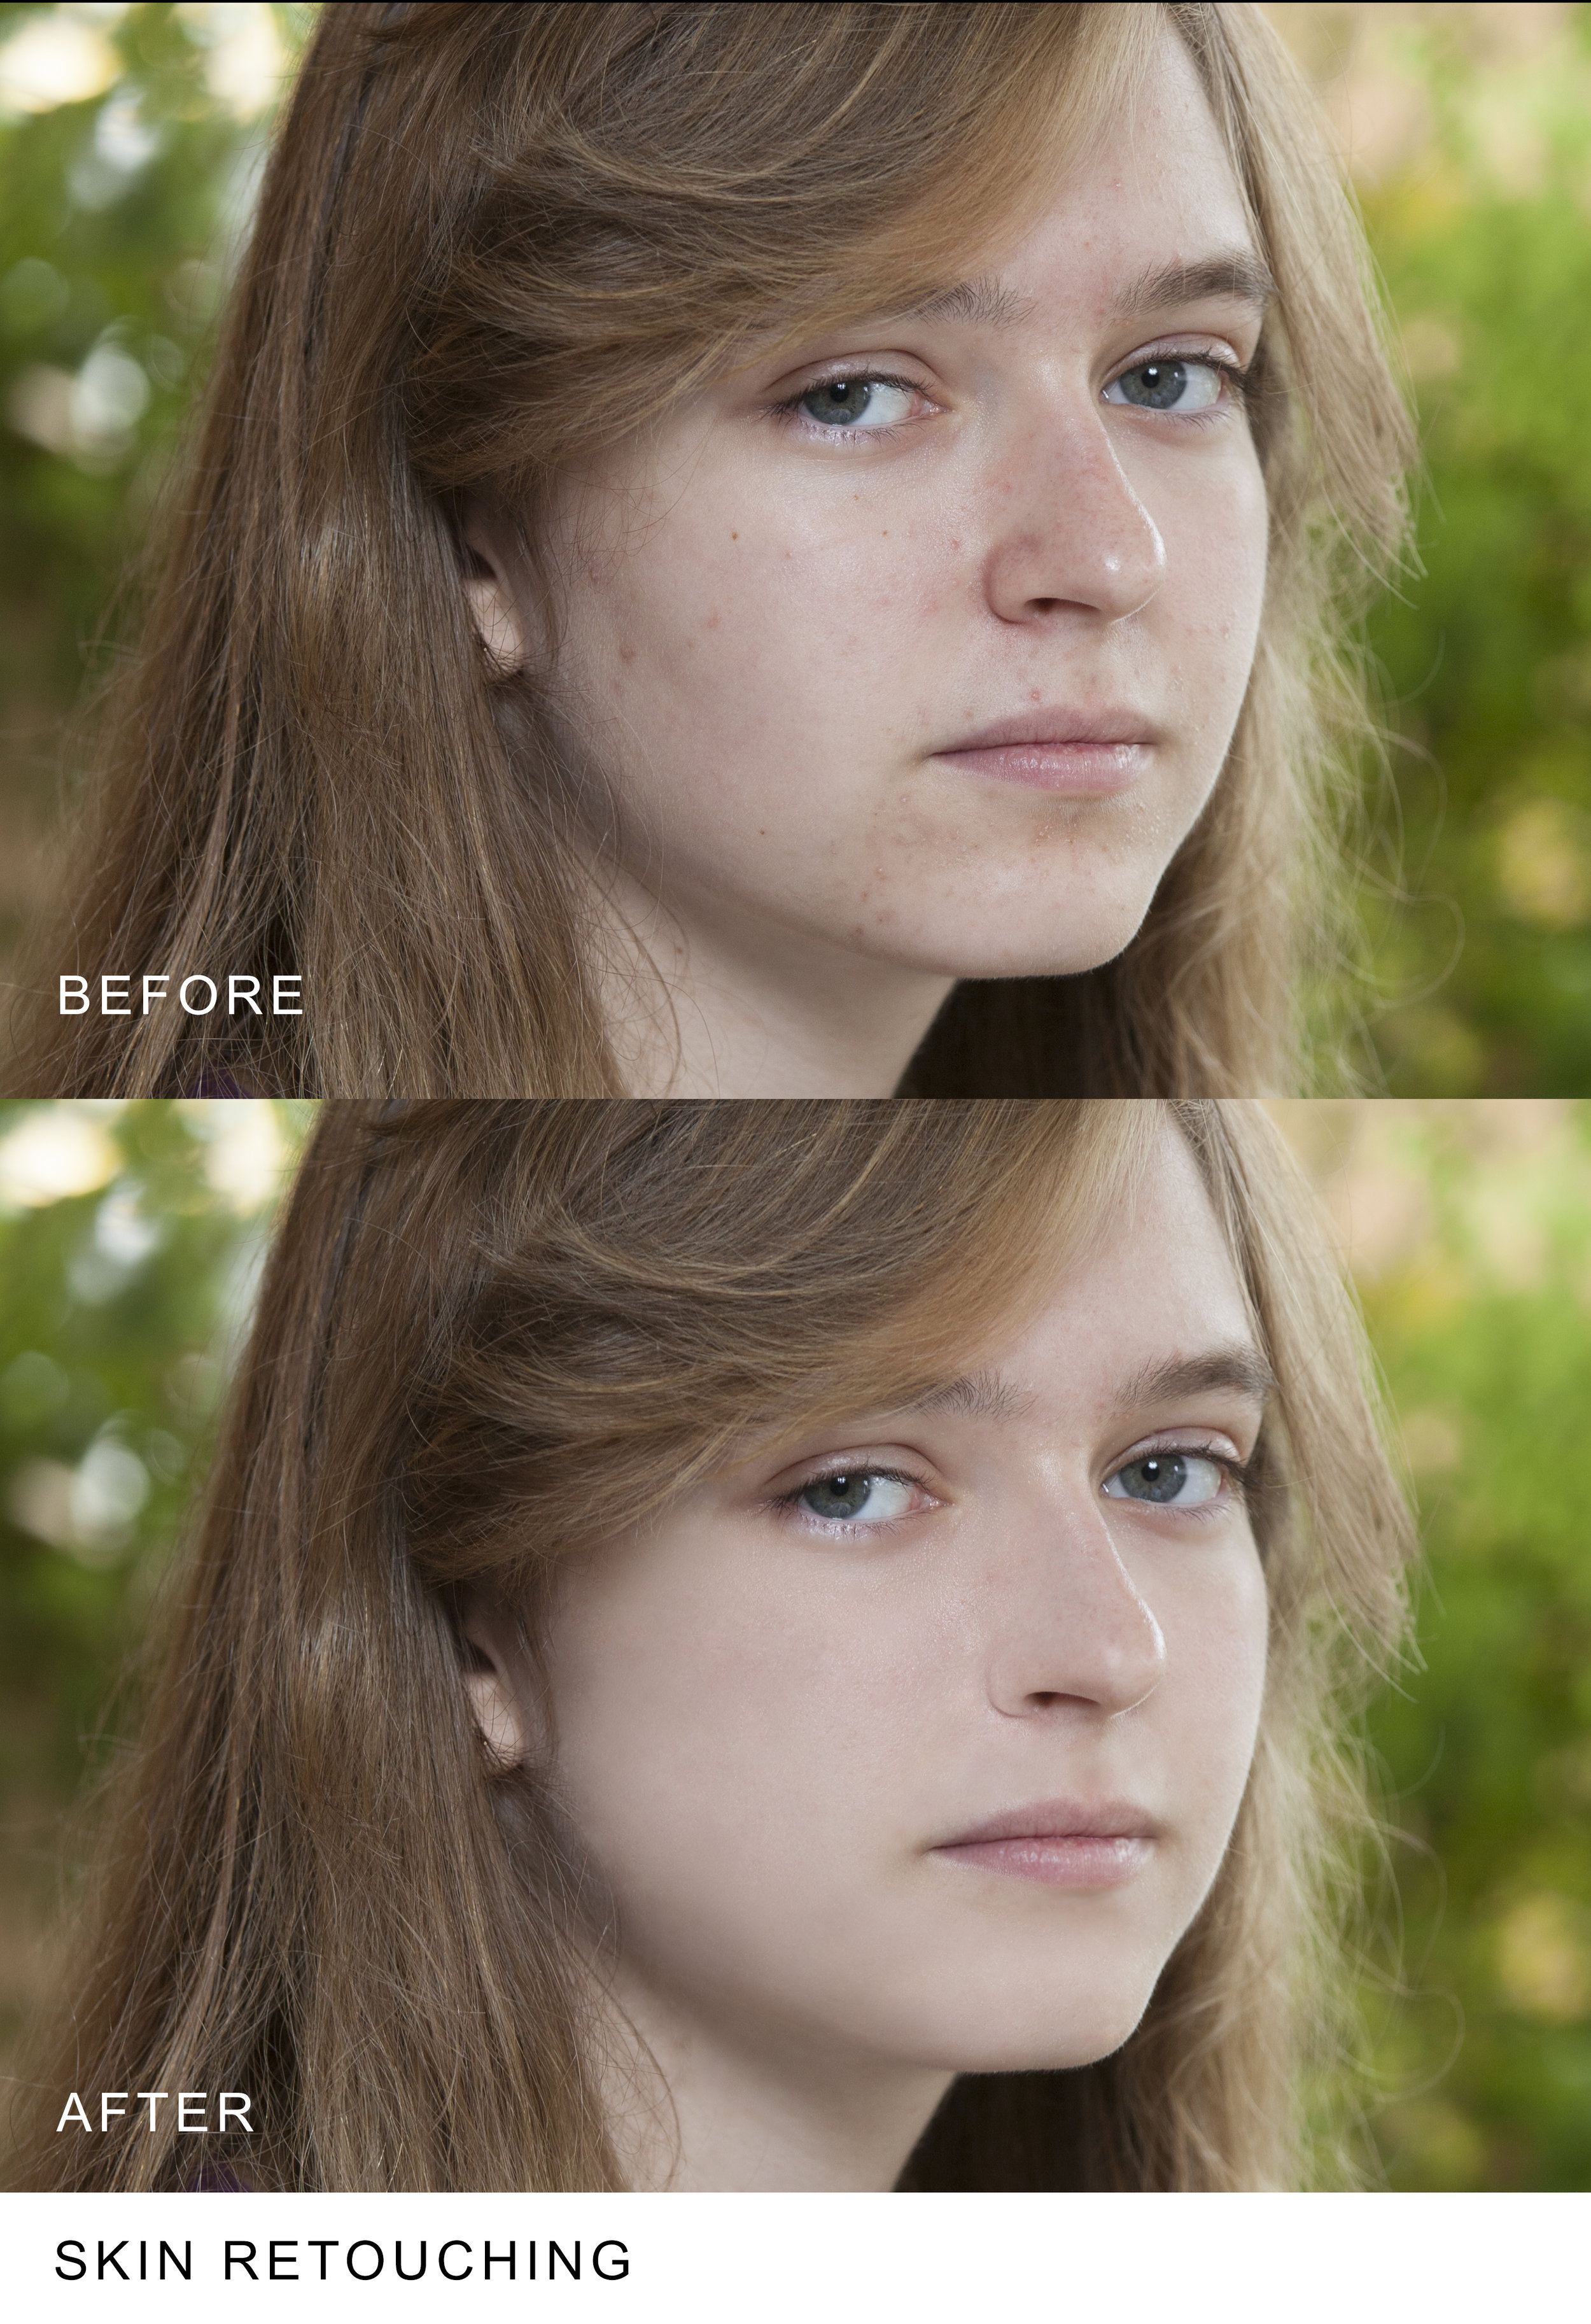  Client: Tracie Waxman  Assignment: Retouch skin. 